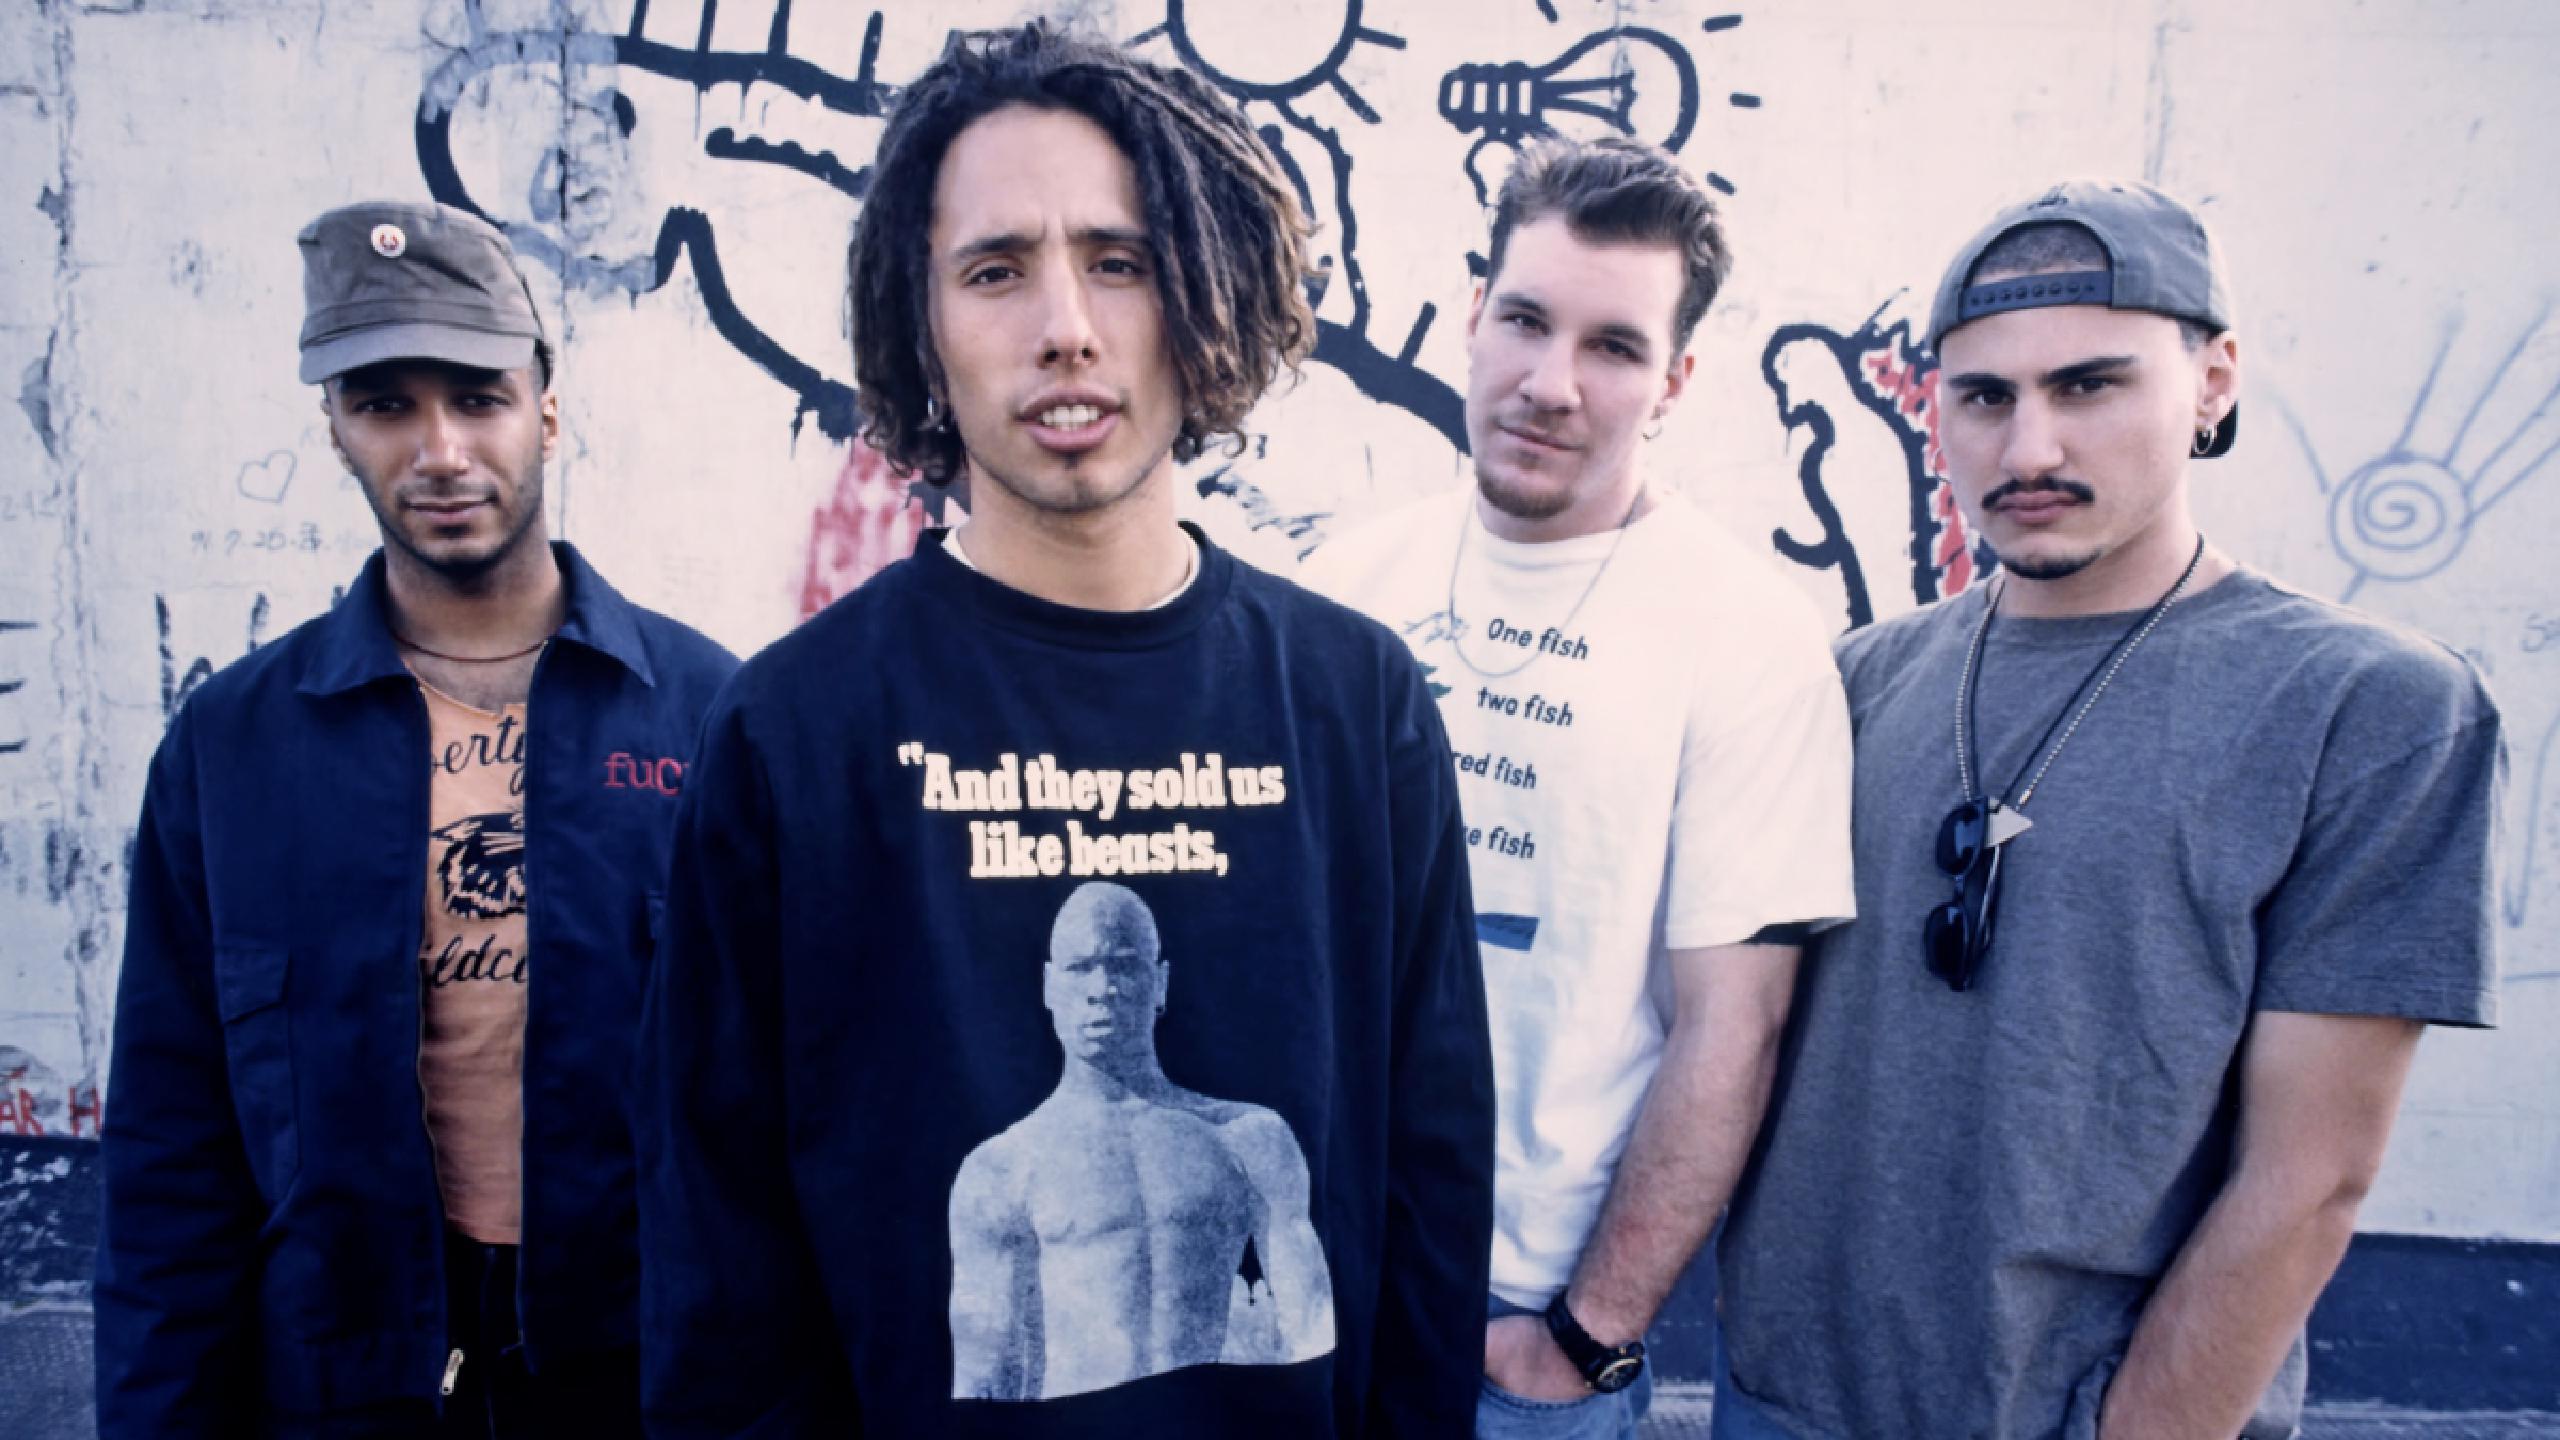 Rage Against The Machine demand UK right-winger change podcast name, “find some other target to troll”